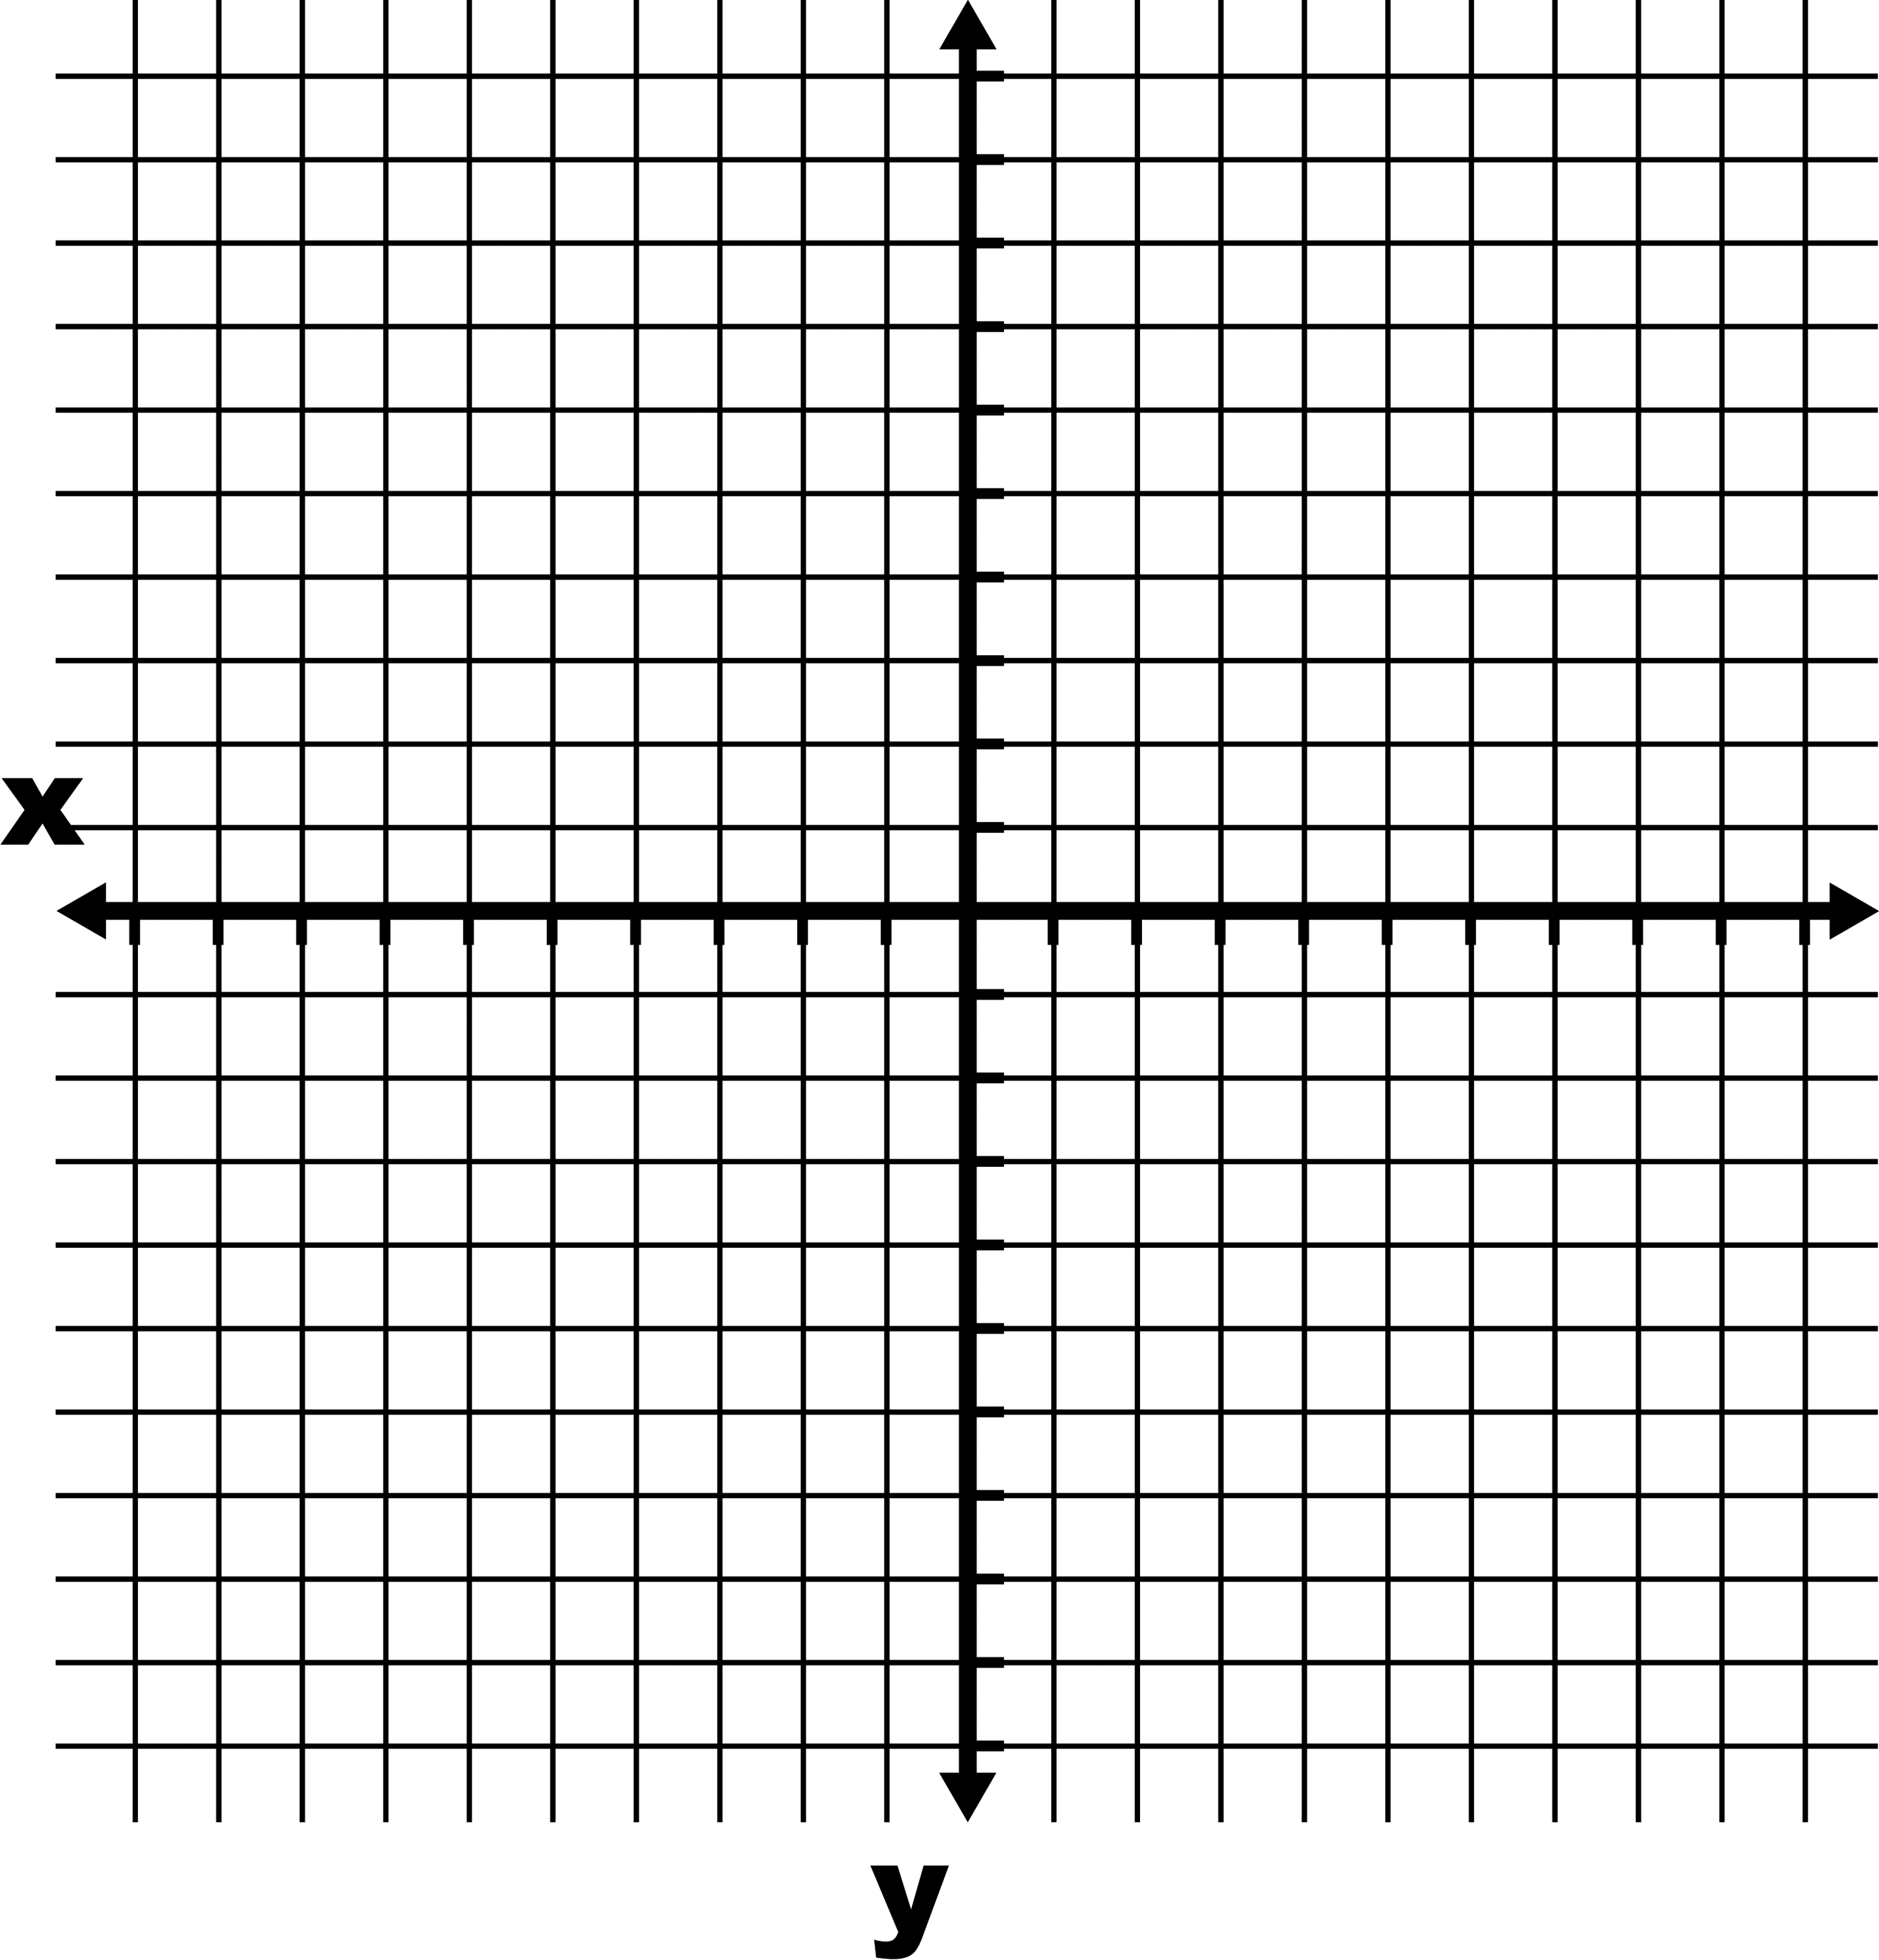 -10 To 10 Coordinate Grid With Axes Labeled And Grid Lines Shown